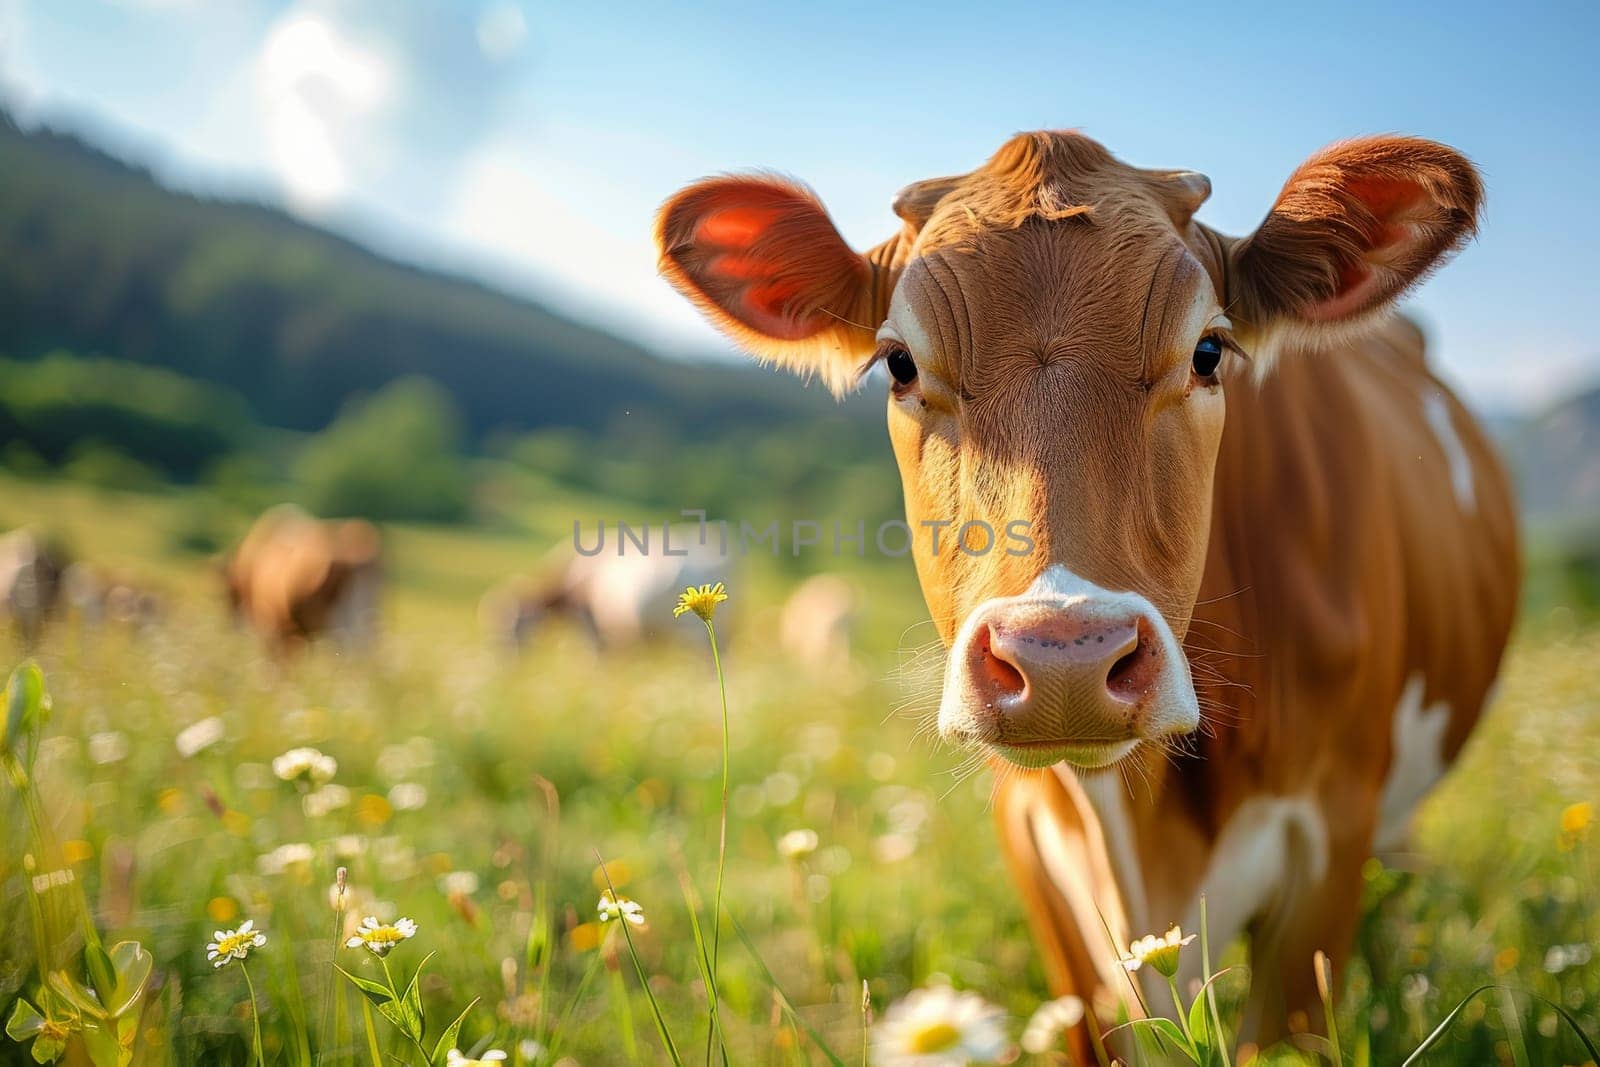 A cow is standing in a field of flowers. The cow is brown and white with a white nose. The field is lush and green, and the flowers are scattered throughout the area